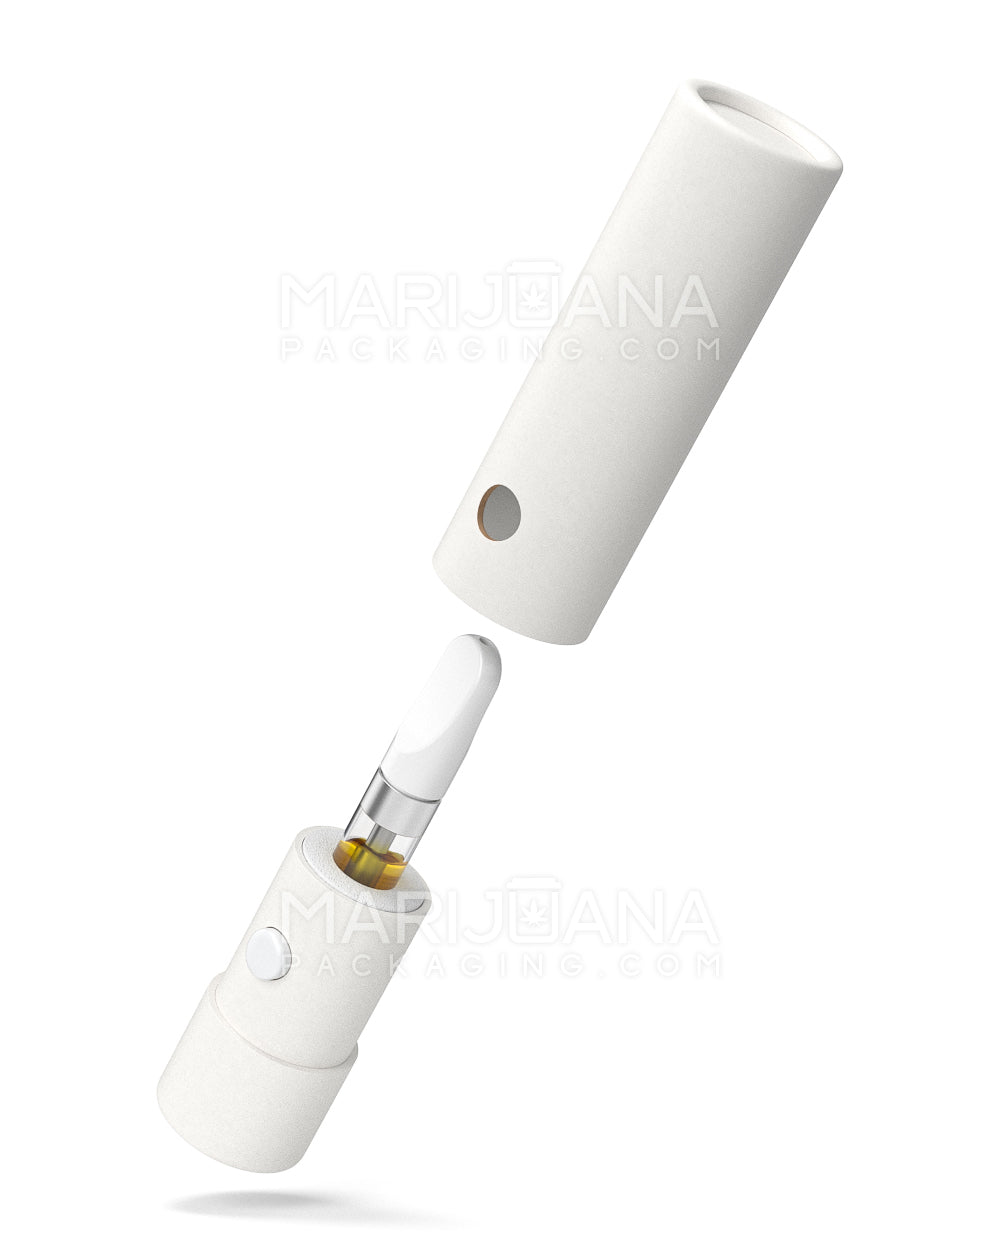 Child Resistant & Sustainable | 100% Recyclable Cardboard Vape Cartridge Tube w/ Press Button | 95mm - White - 100 Count - 4